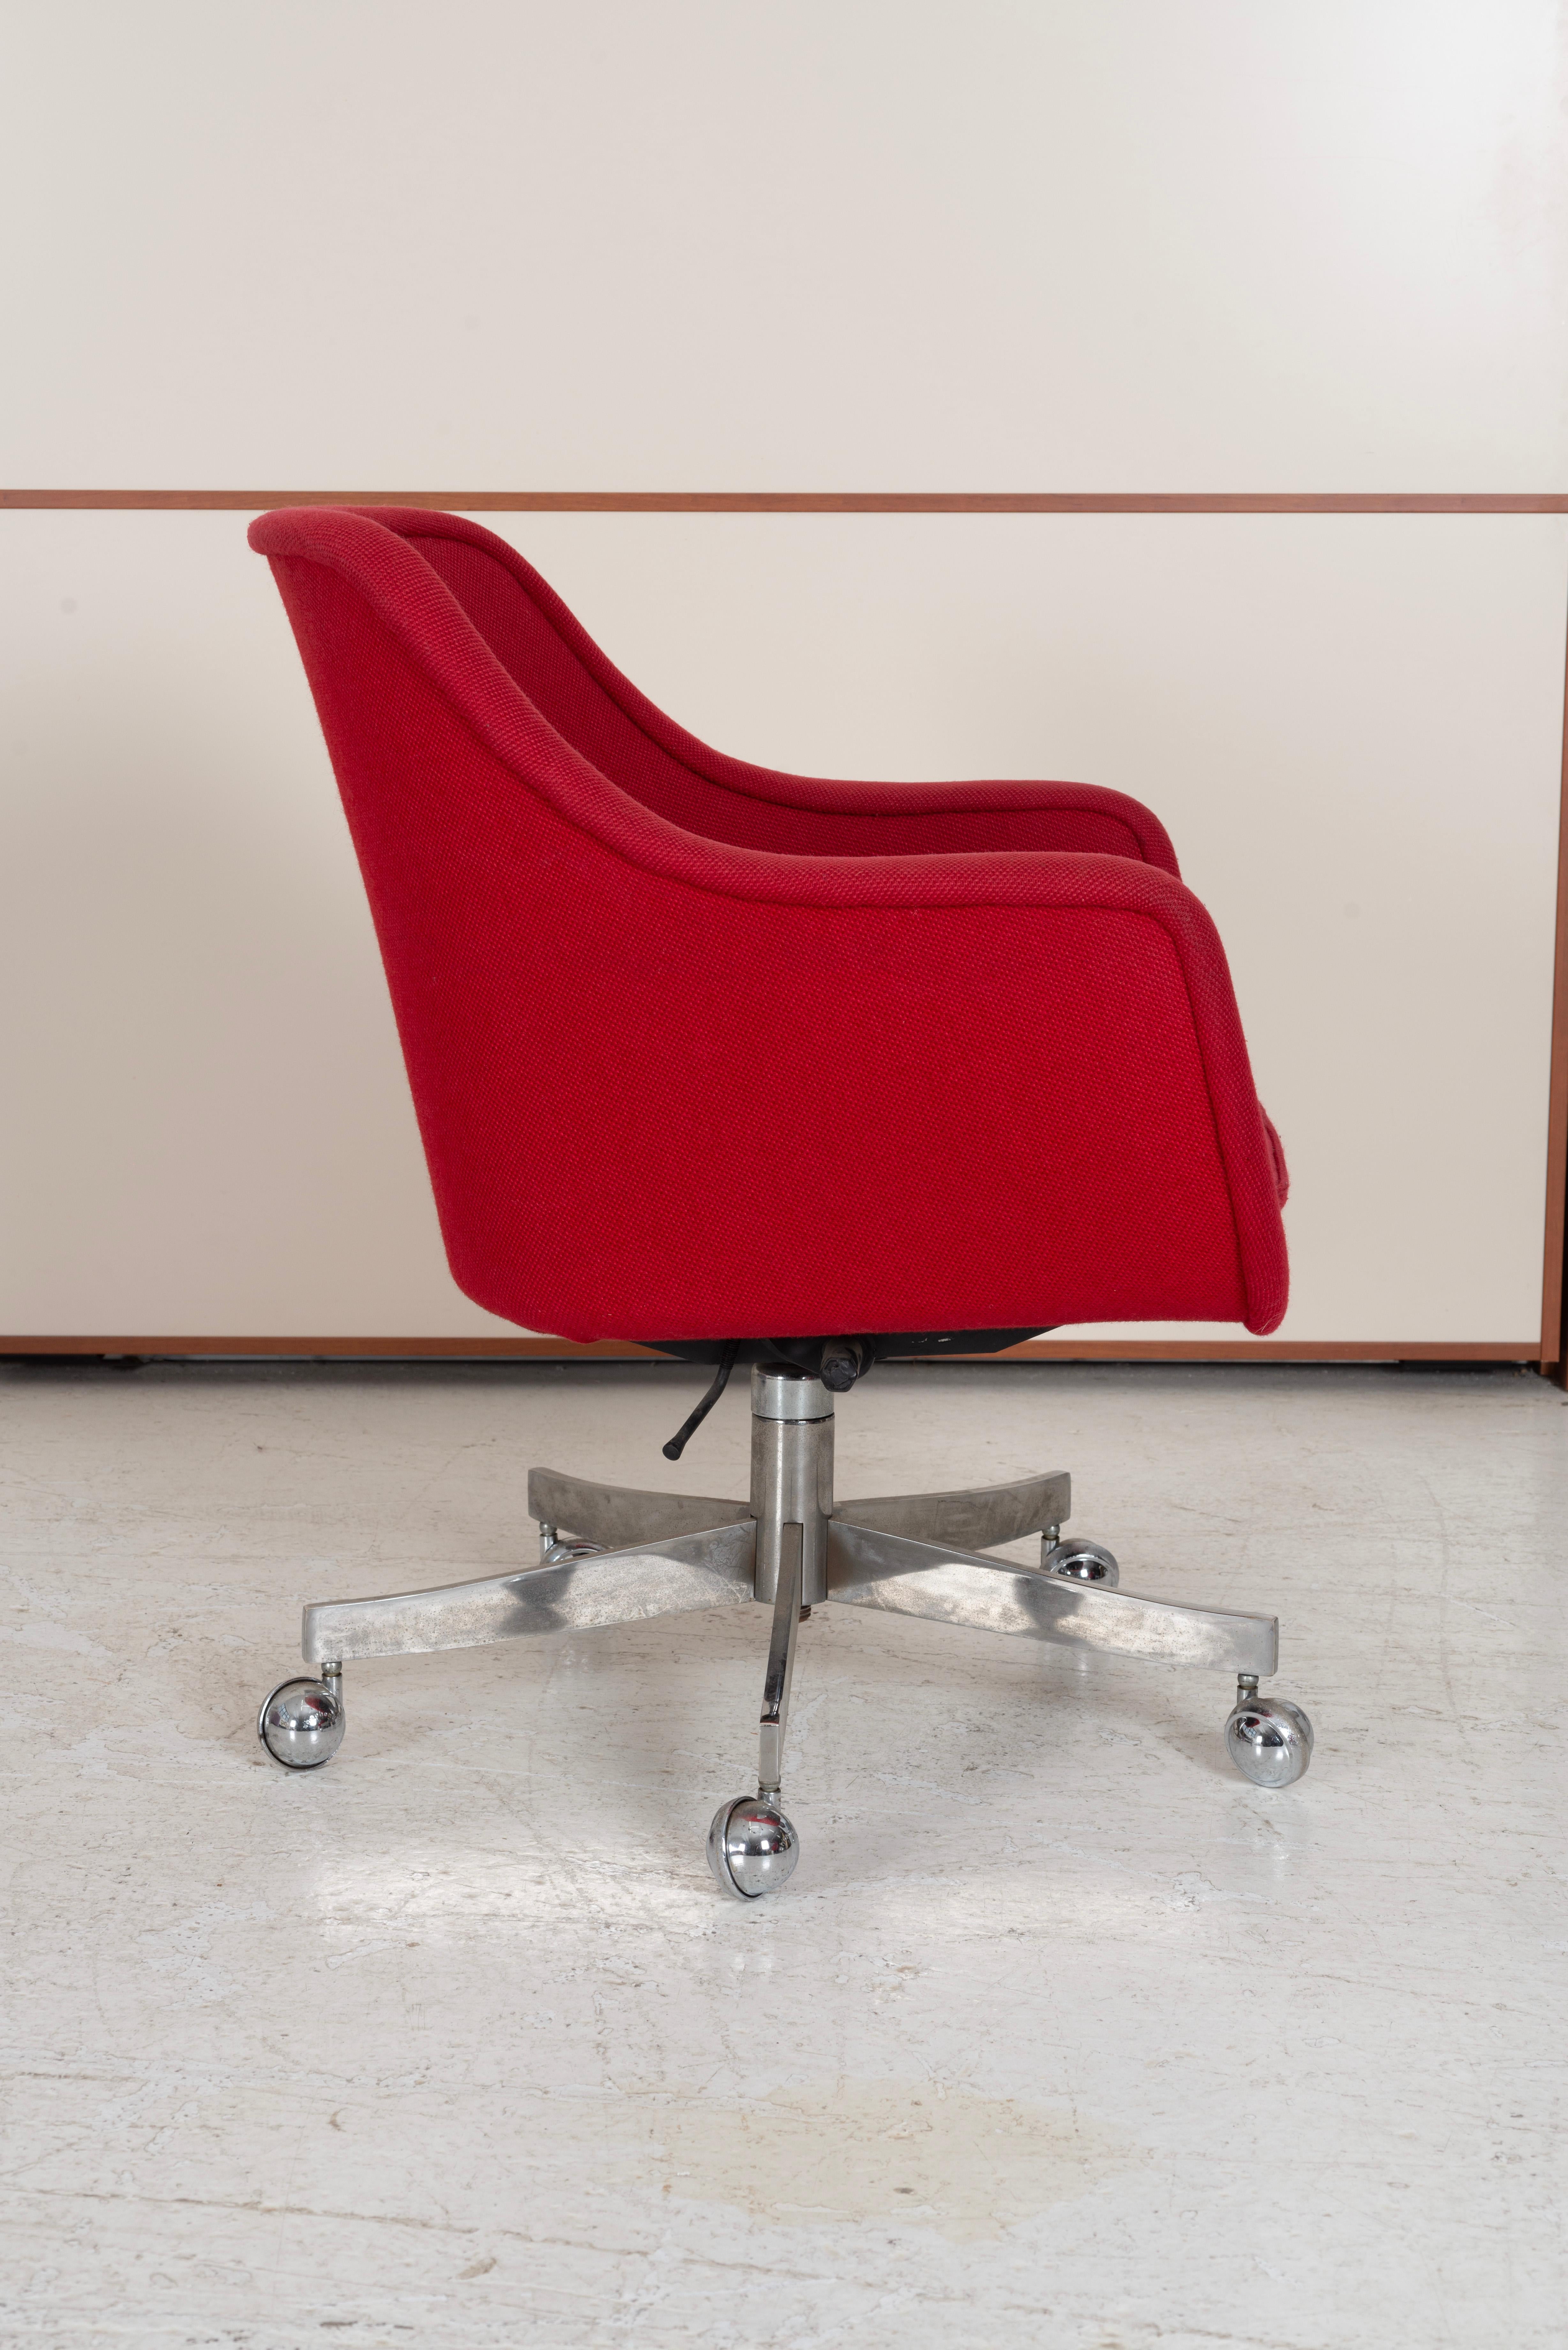 Ward Bennett Desk Chair for Brickell Associates In Good Condition For Sale In Chicago, IL